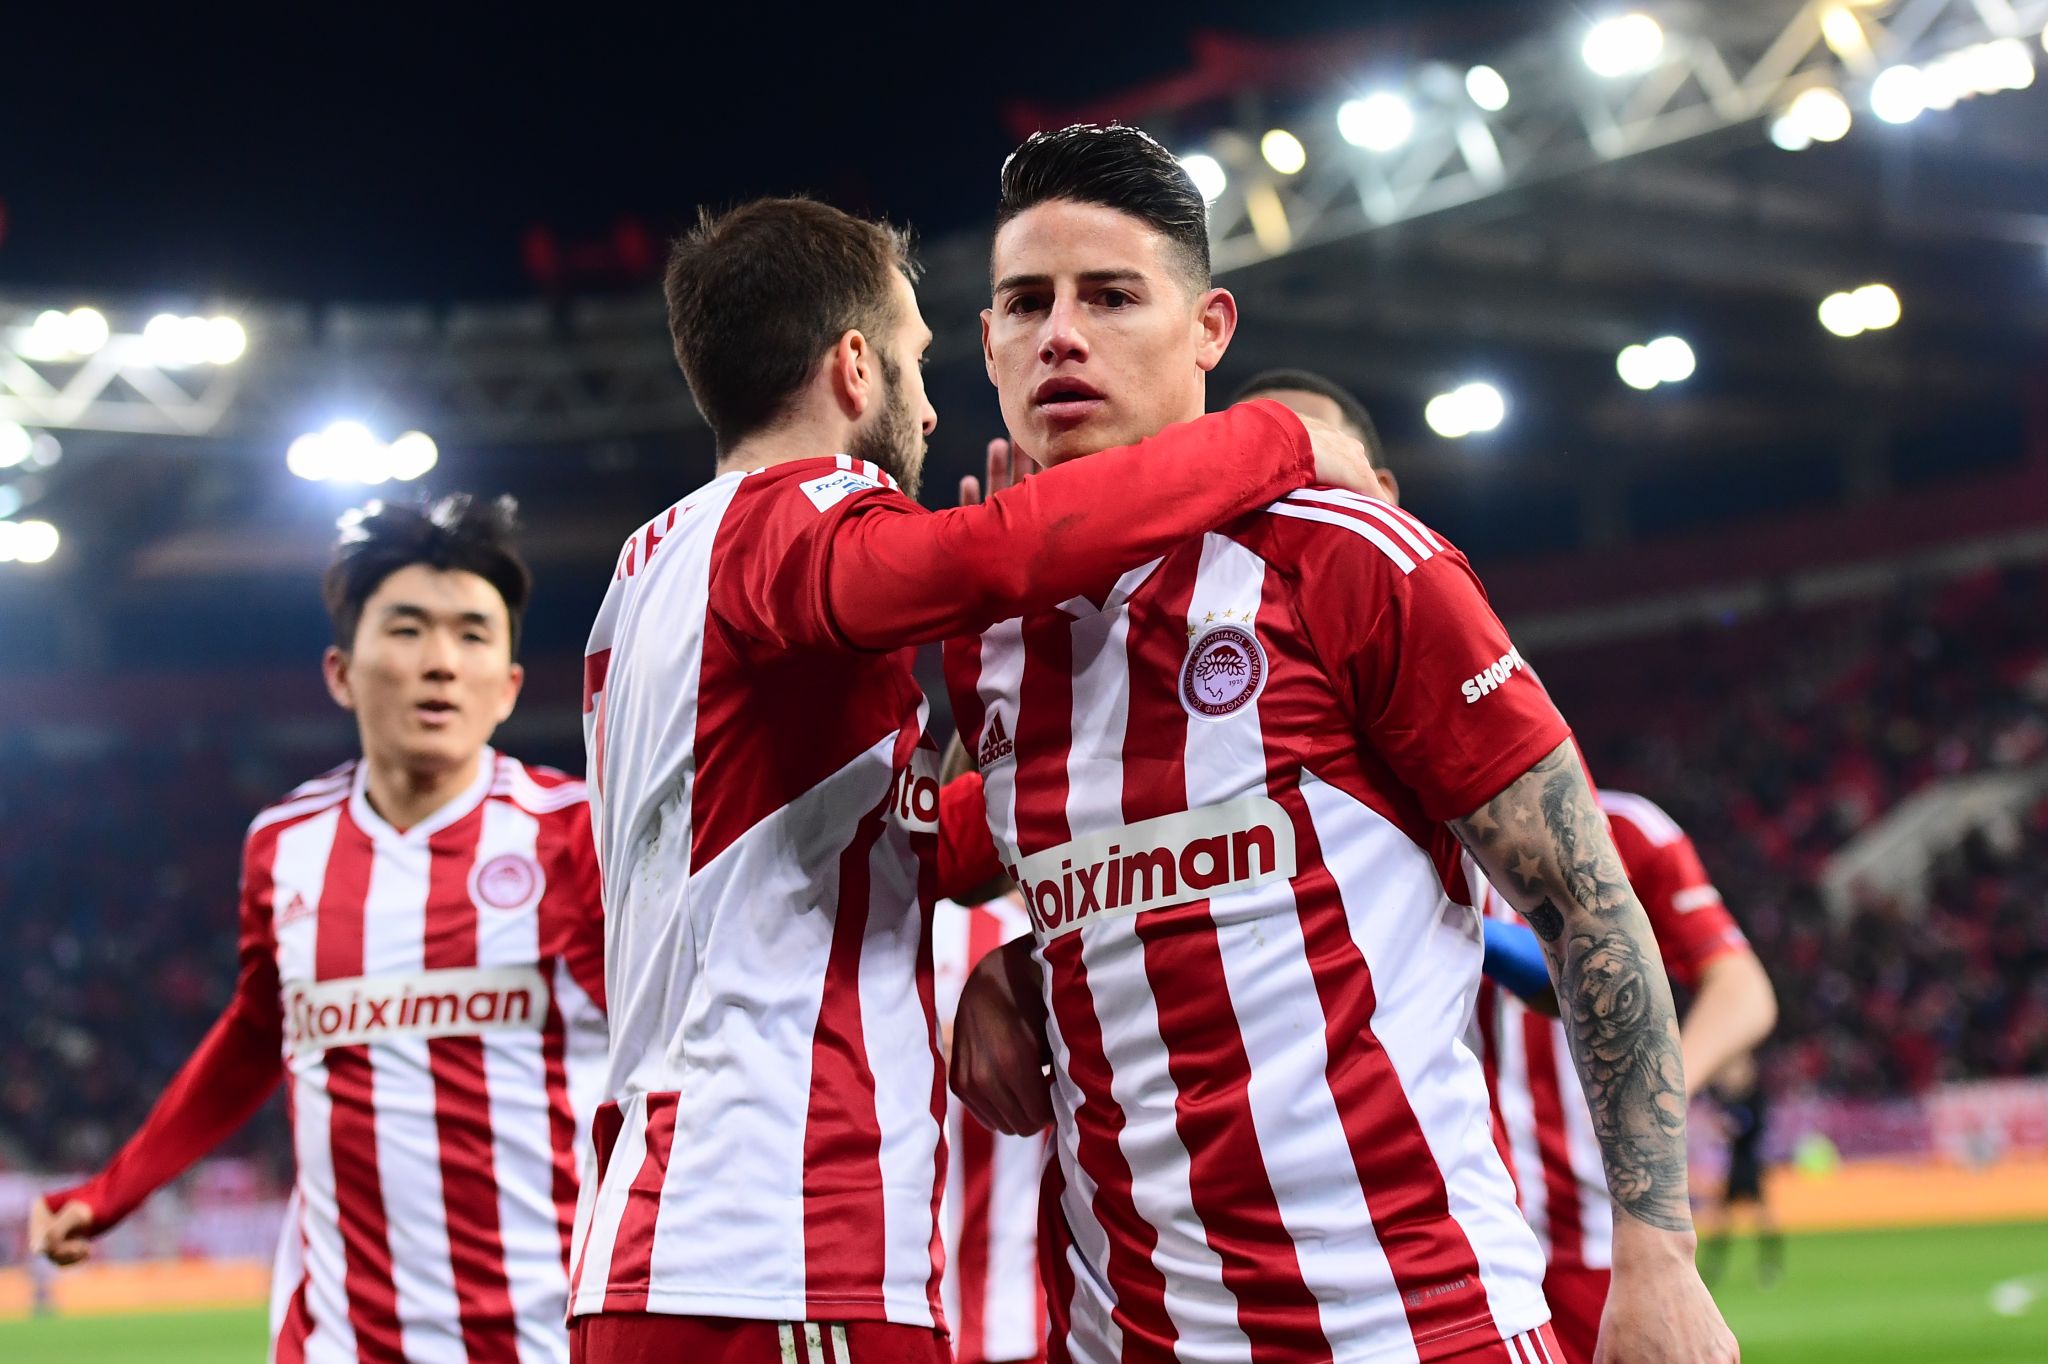 Sweeping display by Olympiacos against Panaitolikos